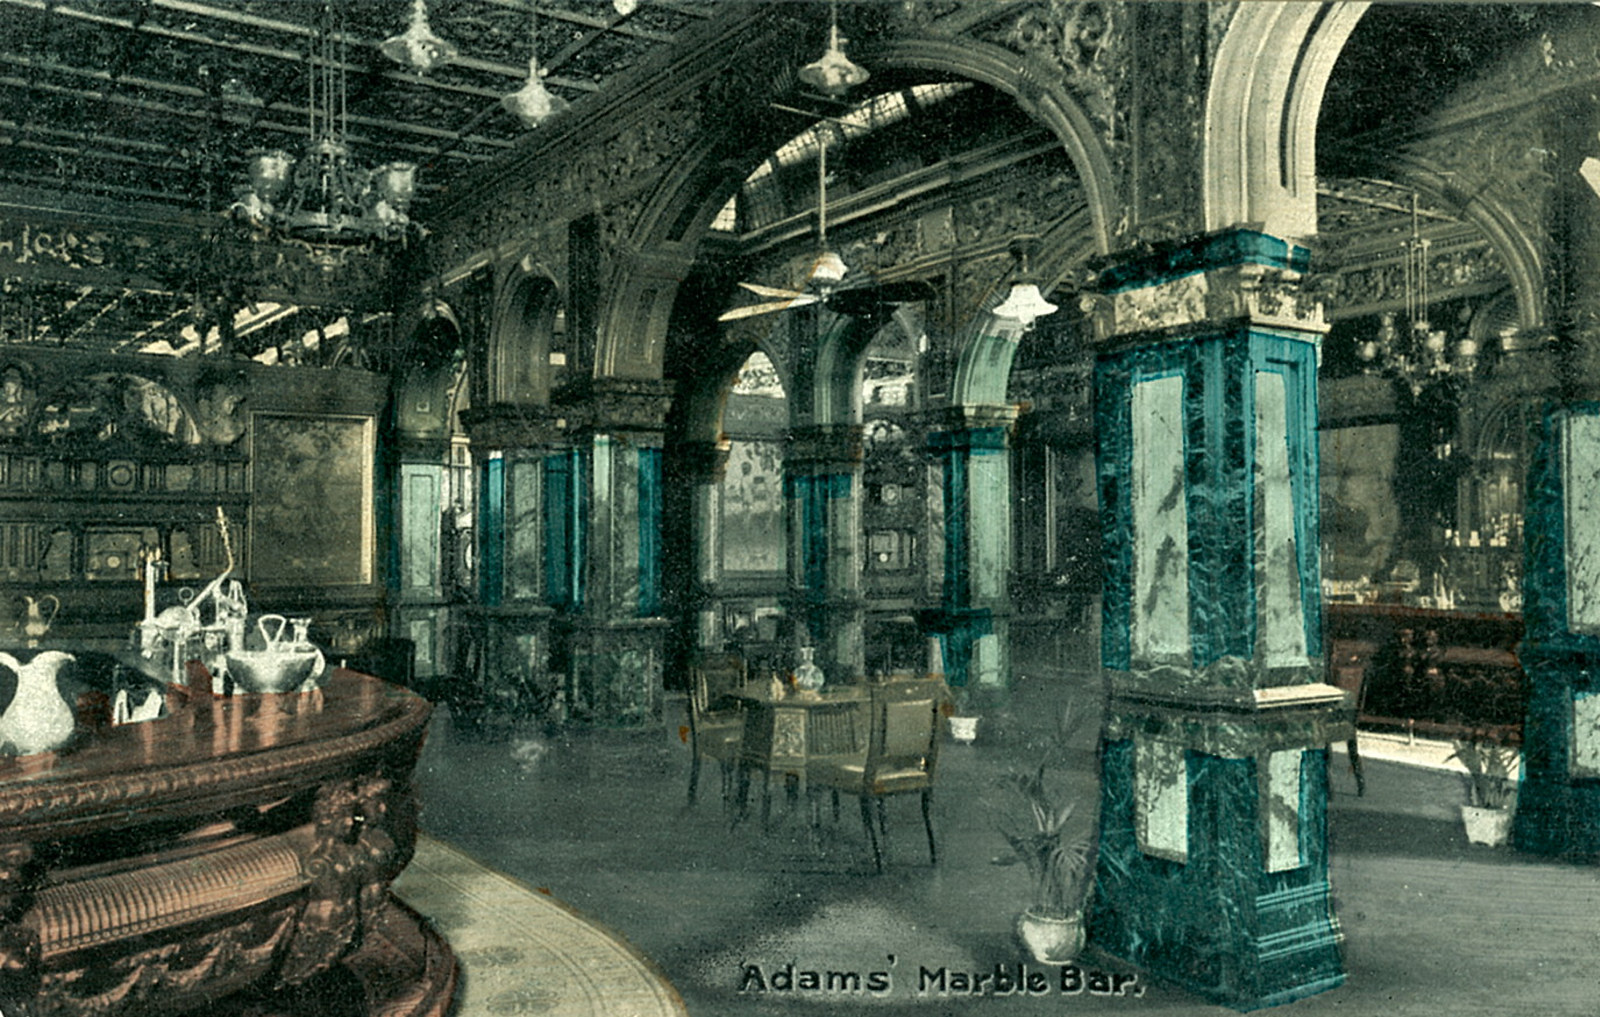 Hand coloured photograph showing the elaborate stonework and panelling of the bar interior.